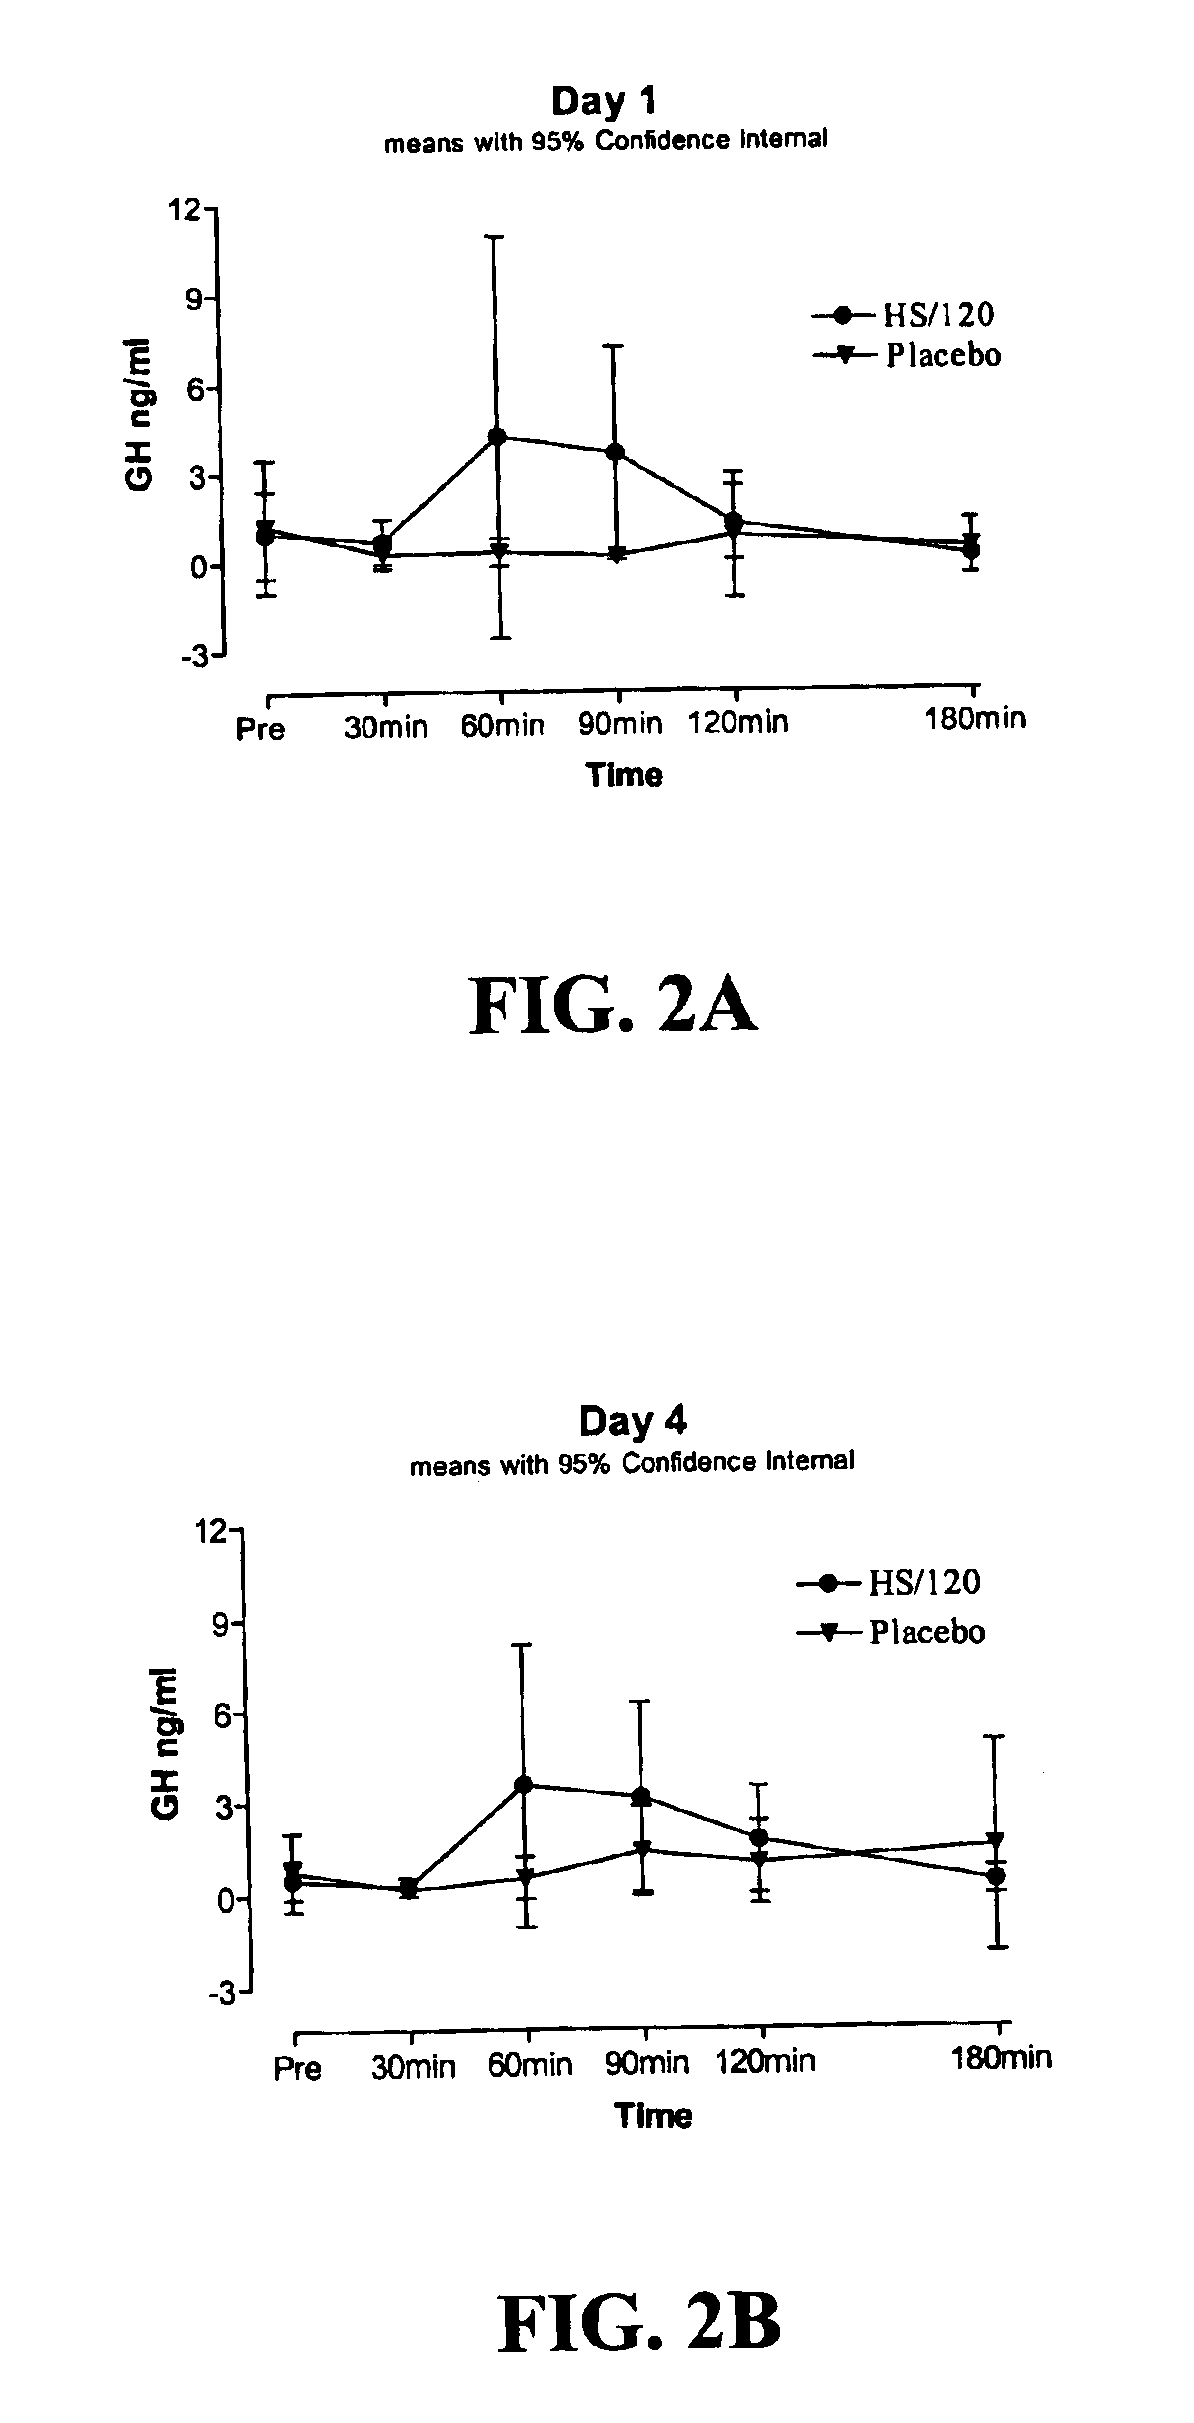 Compositions and methods for increasing growth hormone levels